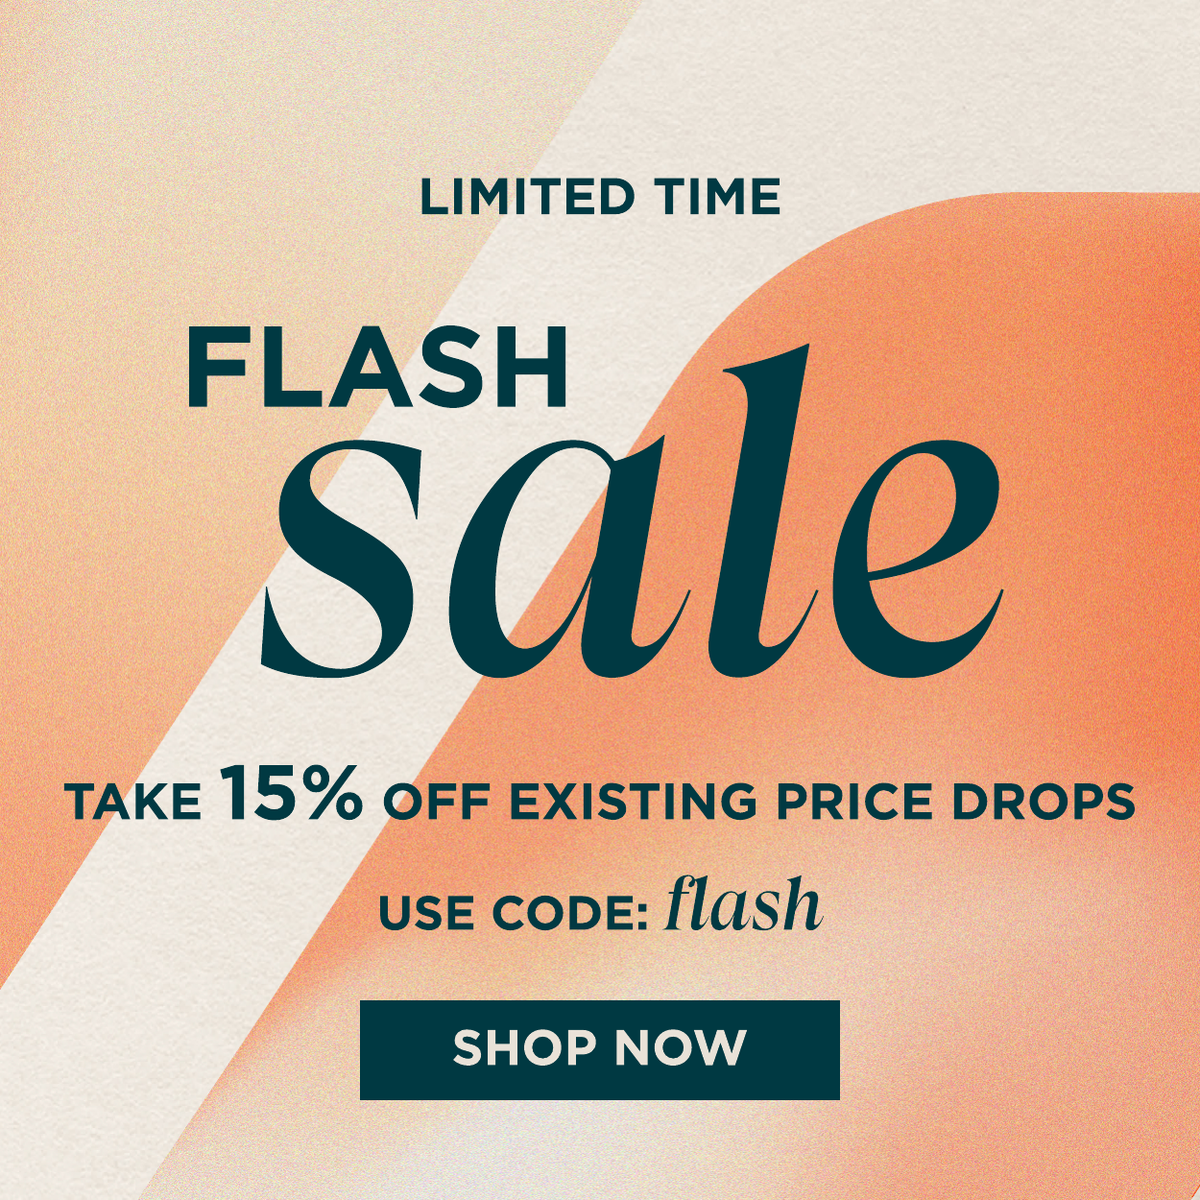 Flash sale take 15% off existing price drops Use code: flash 'Shop Now'